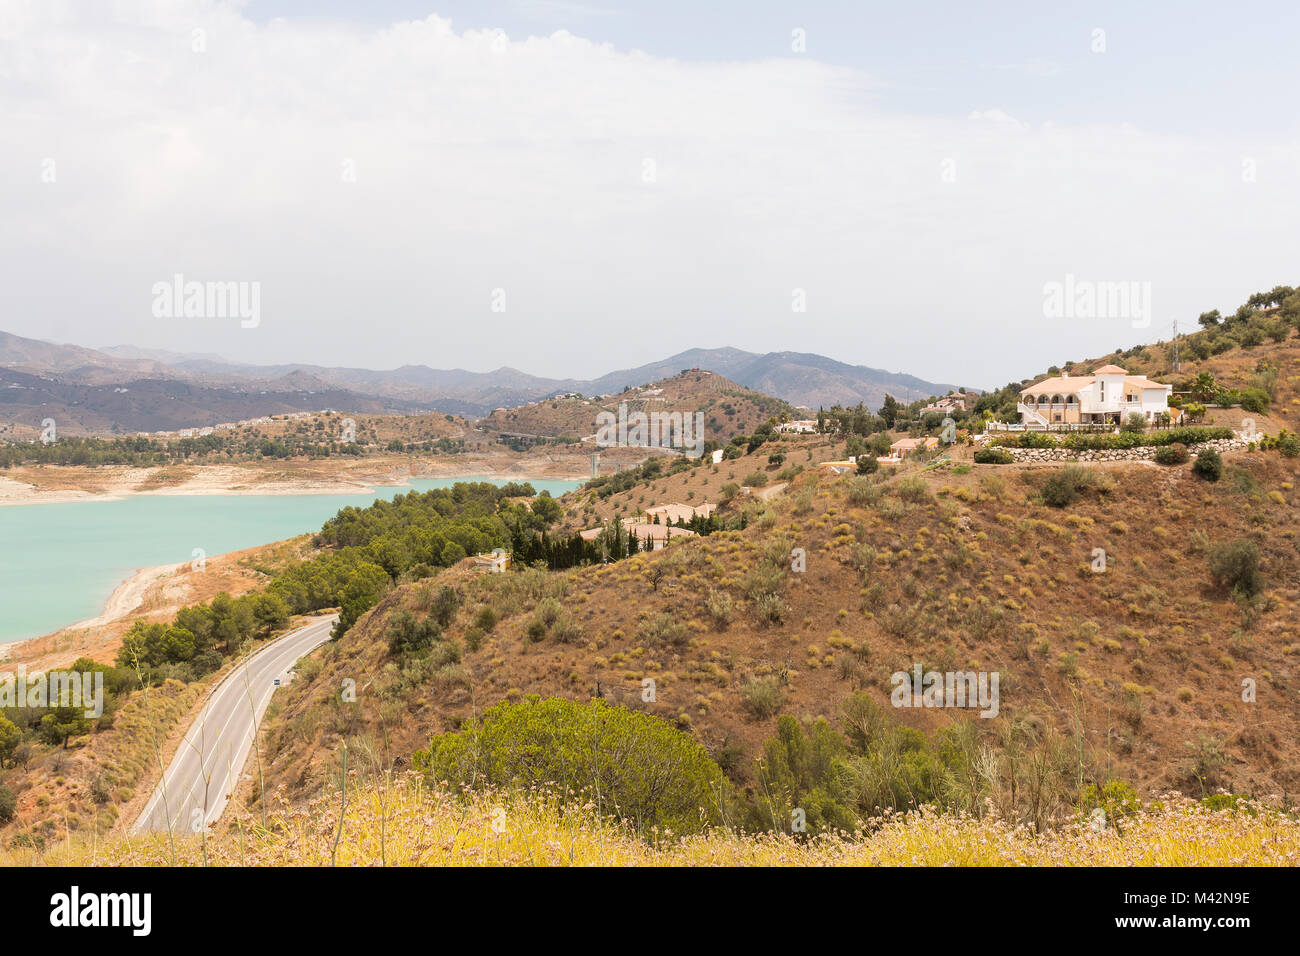 An image of villas on the hillside overlooking Lake Vinuela in the Province of Malaga, Andalusia, Spain, Europe Stock Photo